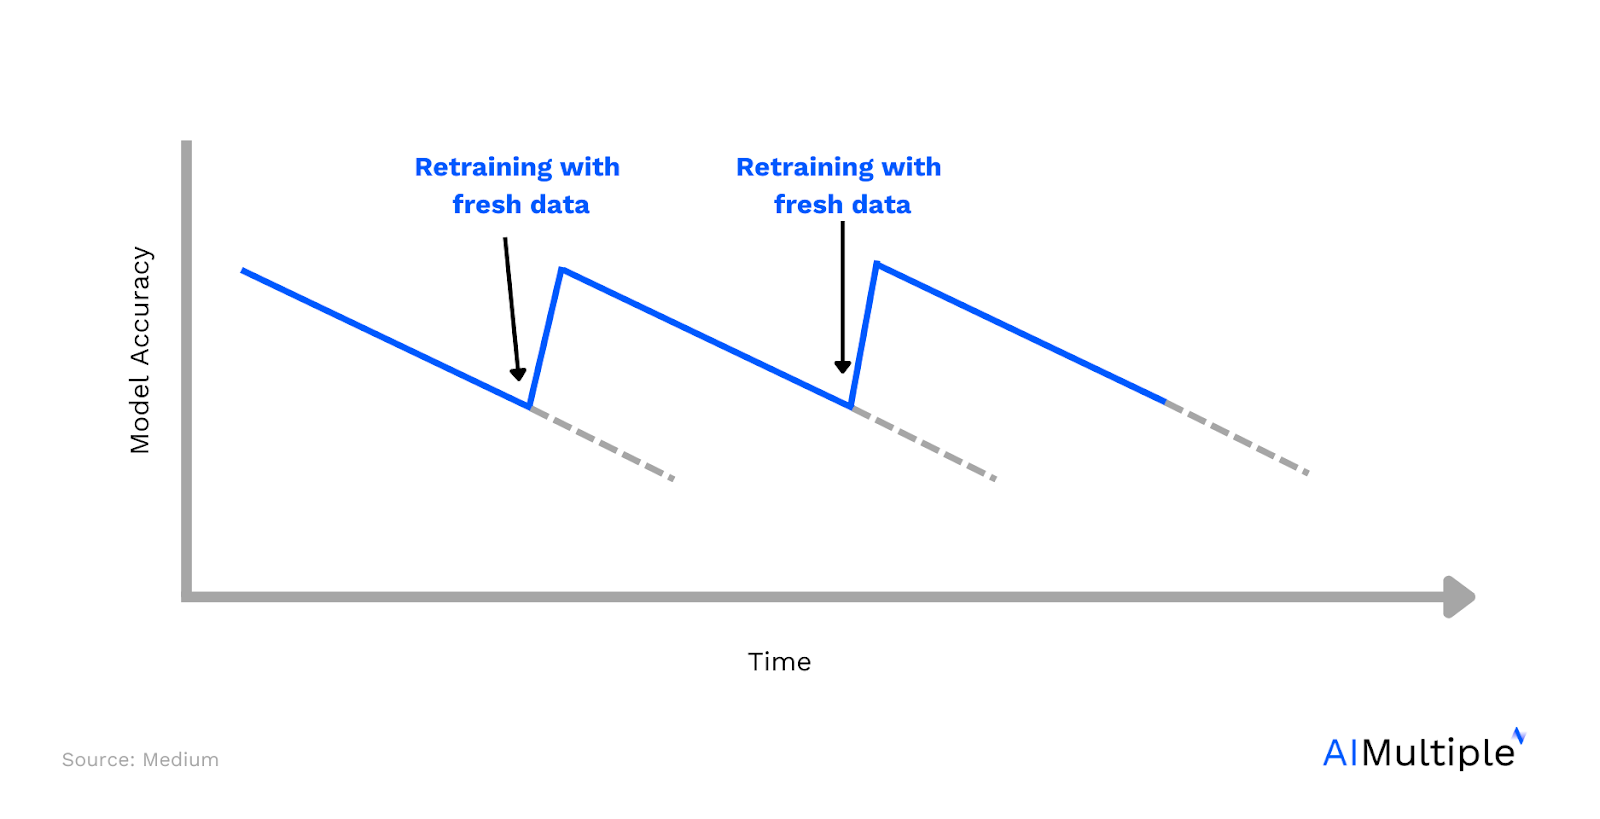 A graph showing that as the model is retrained with fresh data the performance increases and starts to fall again untill its retrained. Reinstating the importance of data collection for AI improvement.  